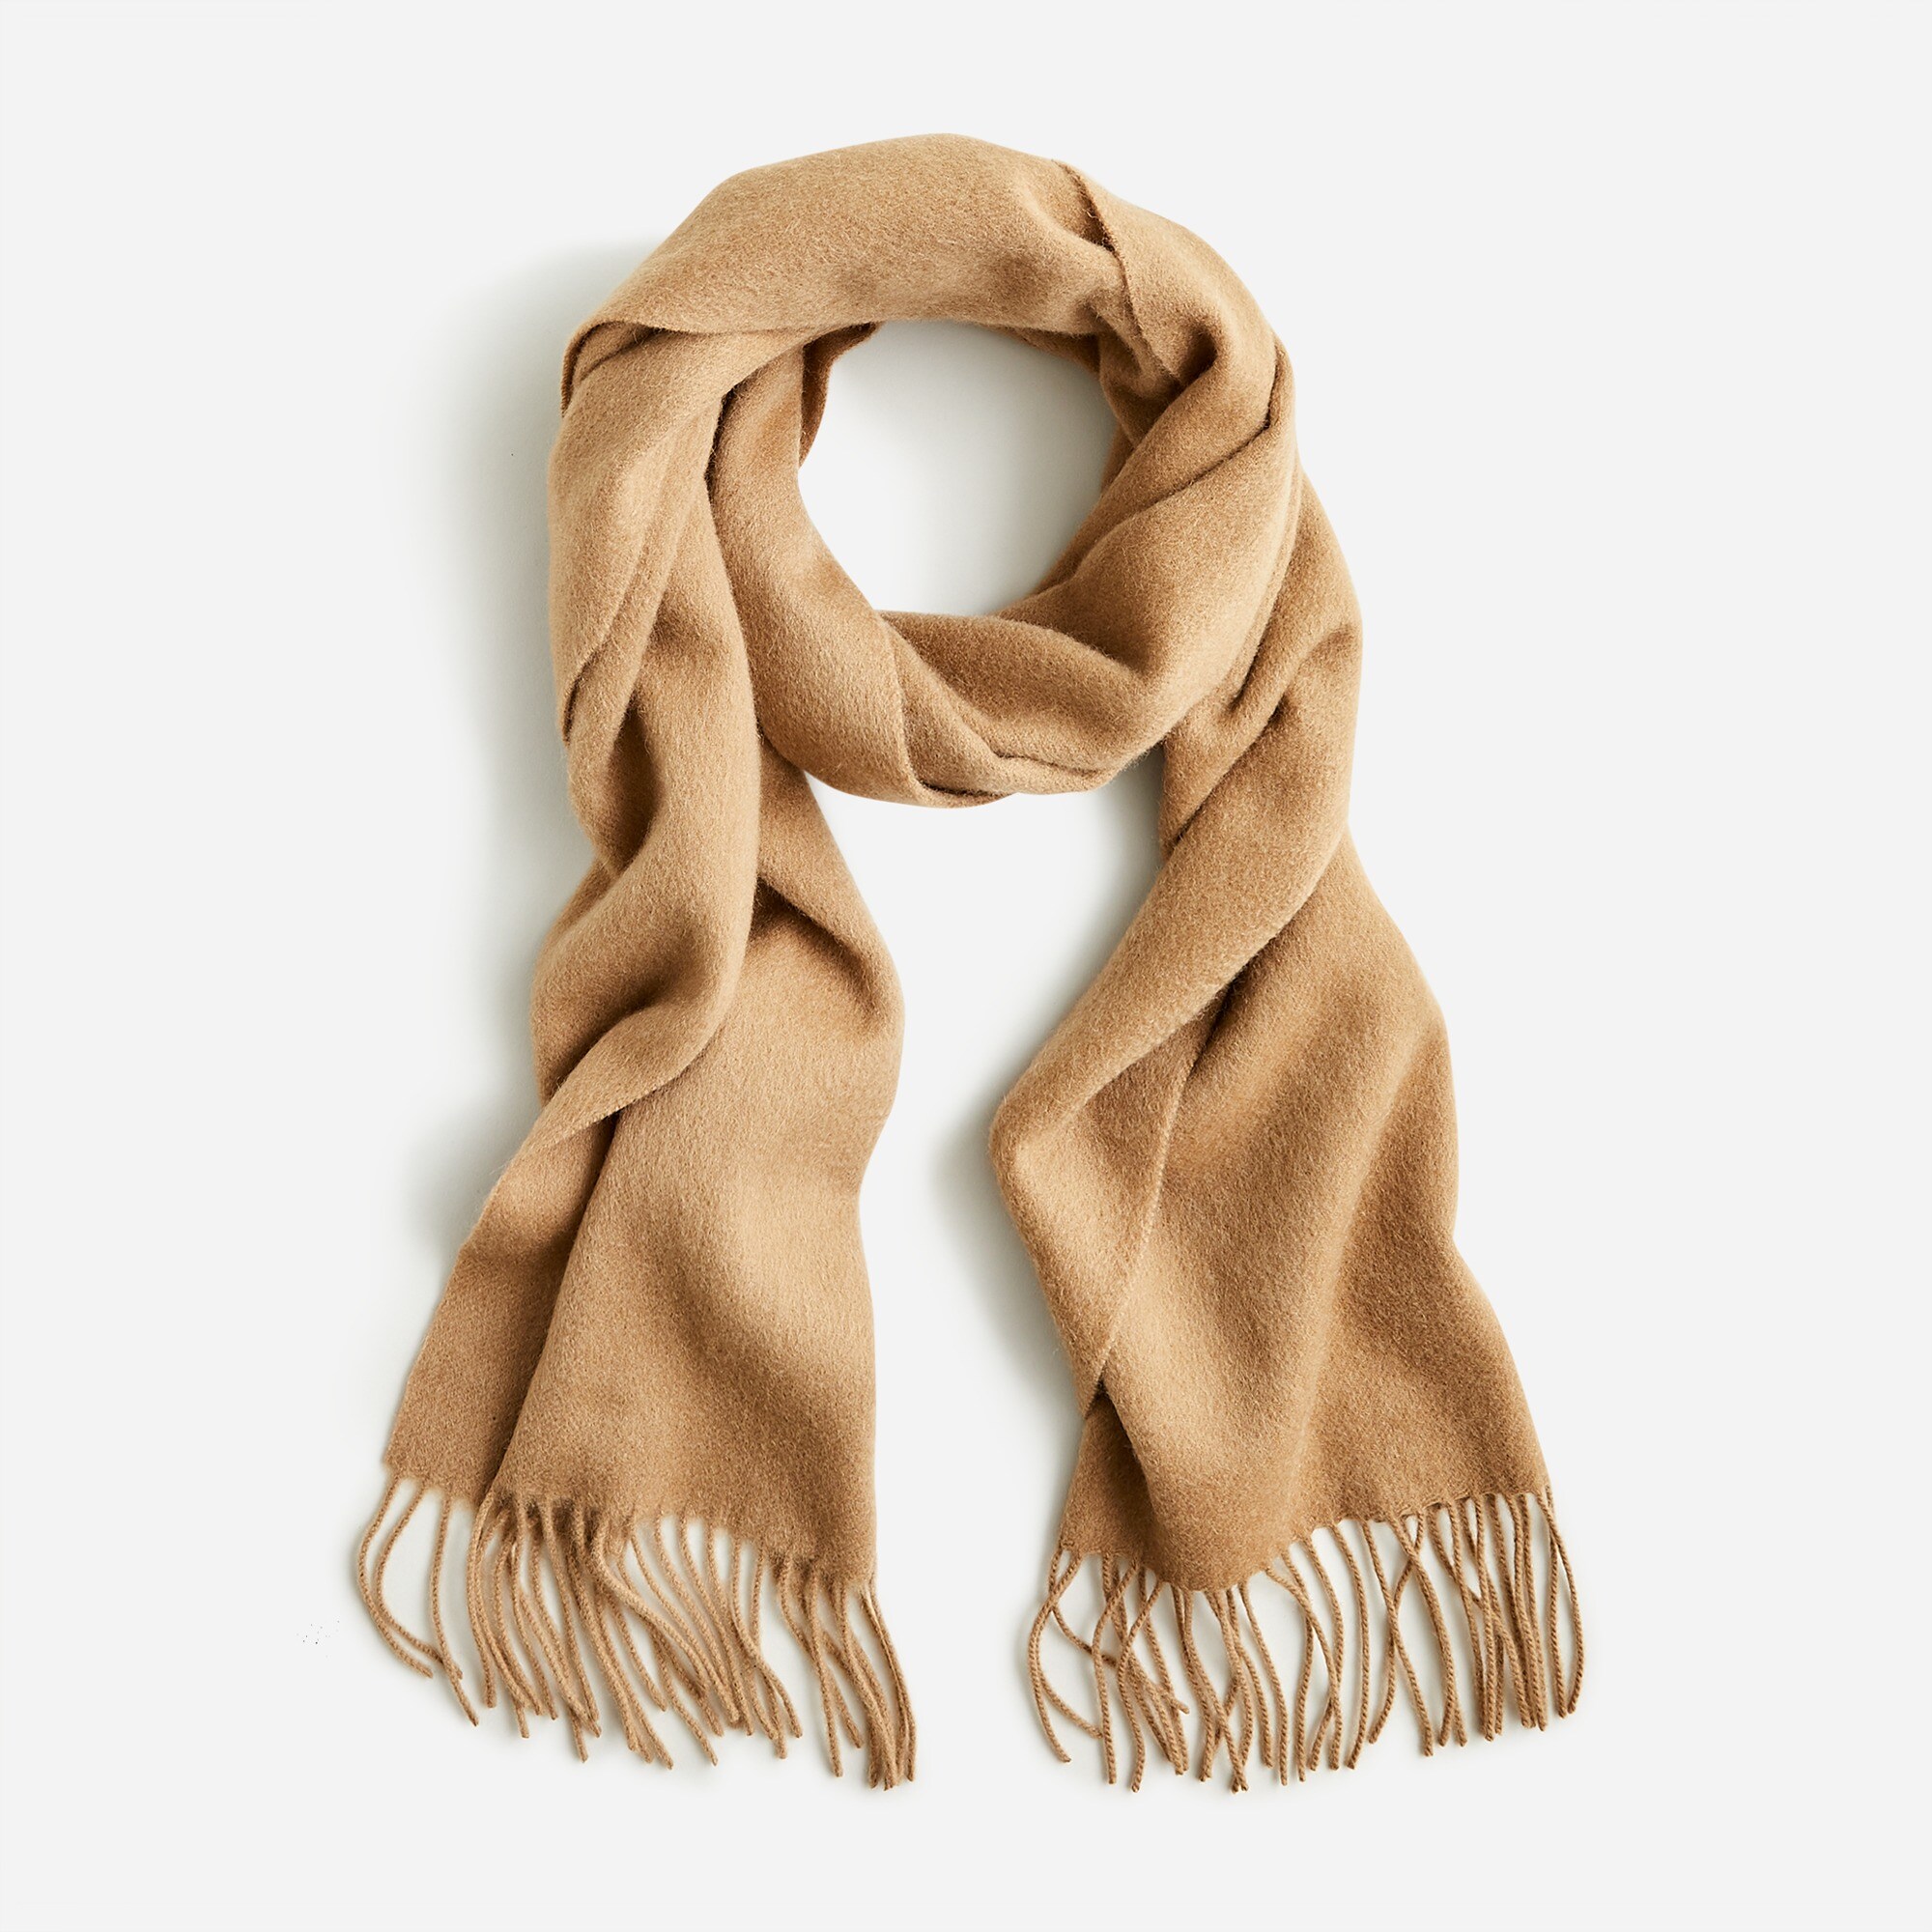  Solid cashmere scarf